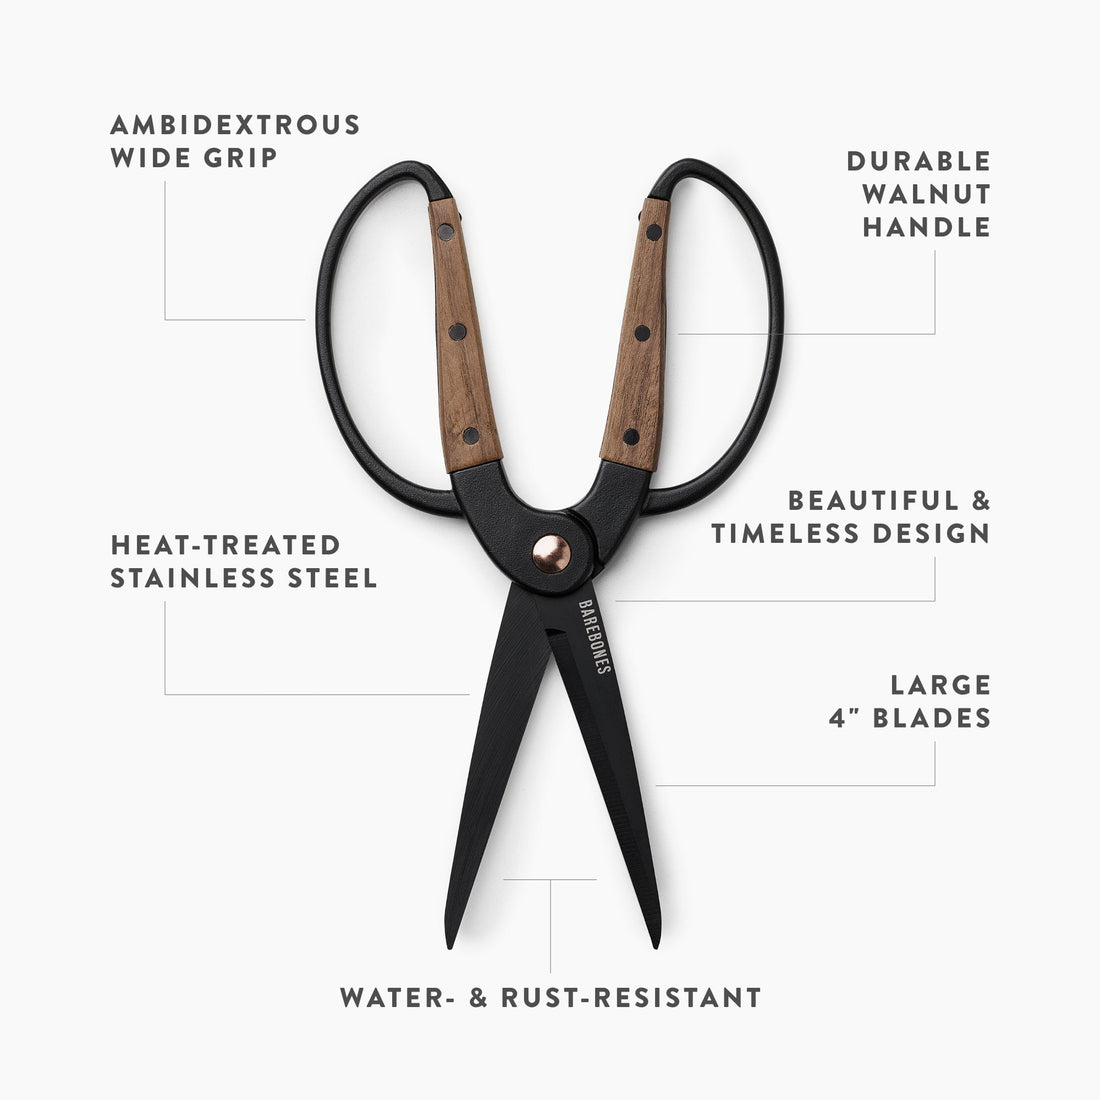 The use and classification of garden scissors in garden tools